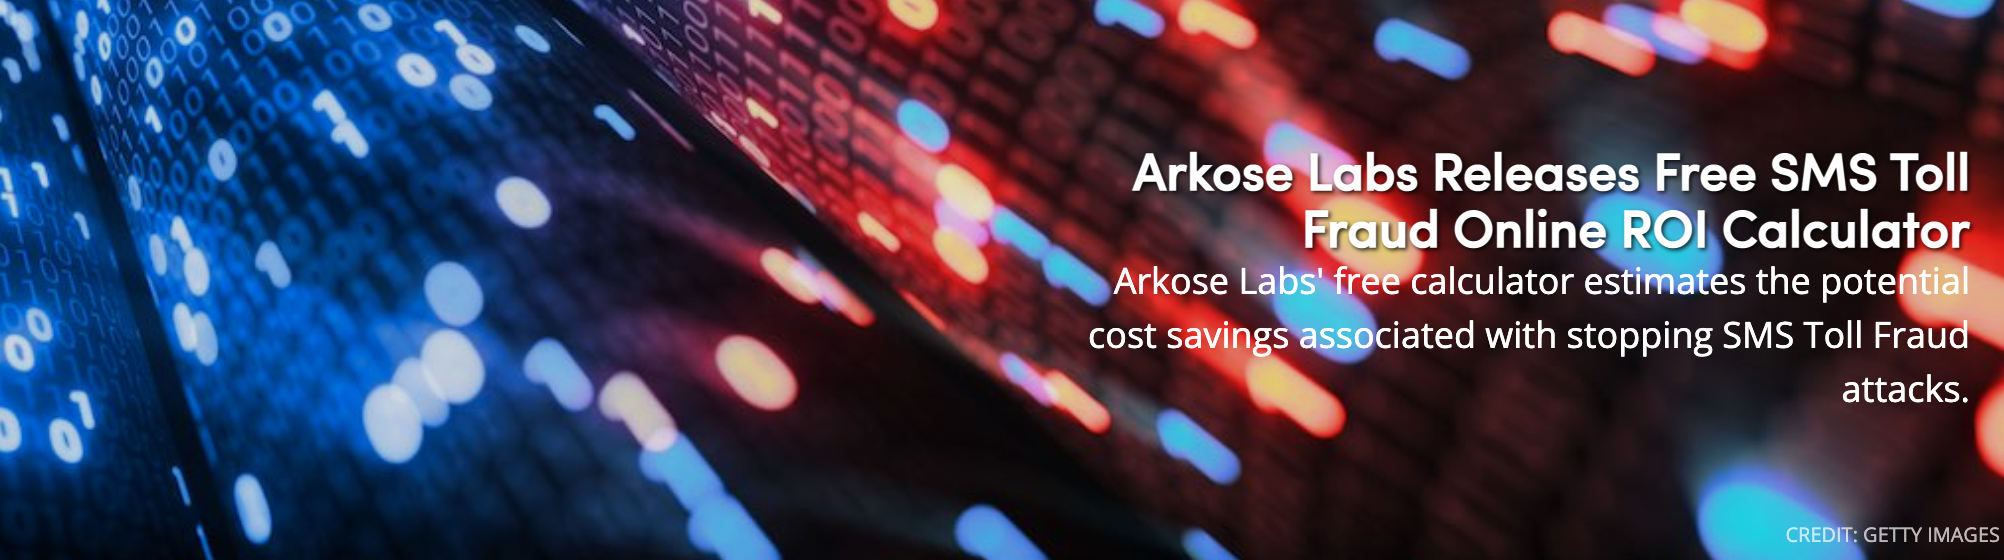 Arkose Labs Releases Free SMS Toll Fraud Online ROI Calculator Arkose Labs